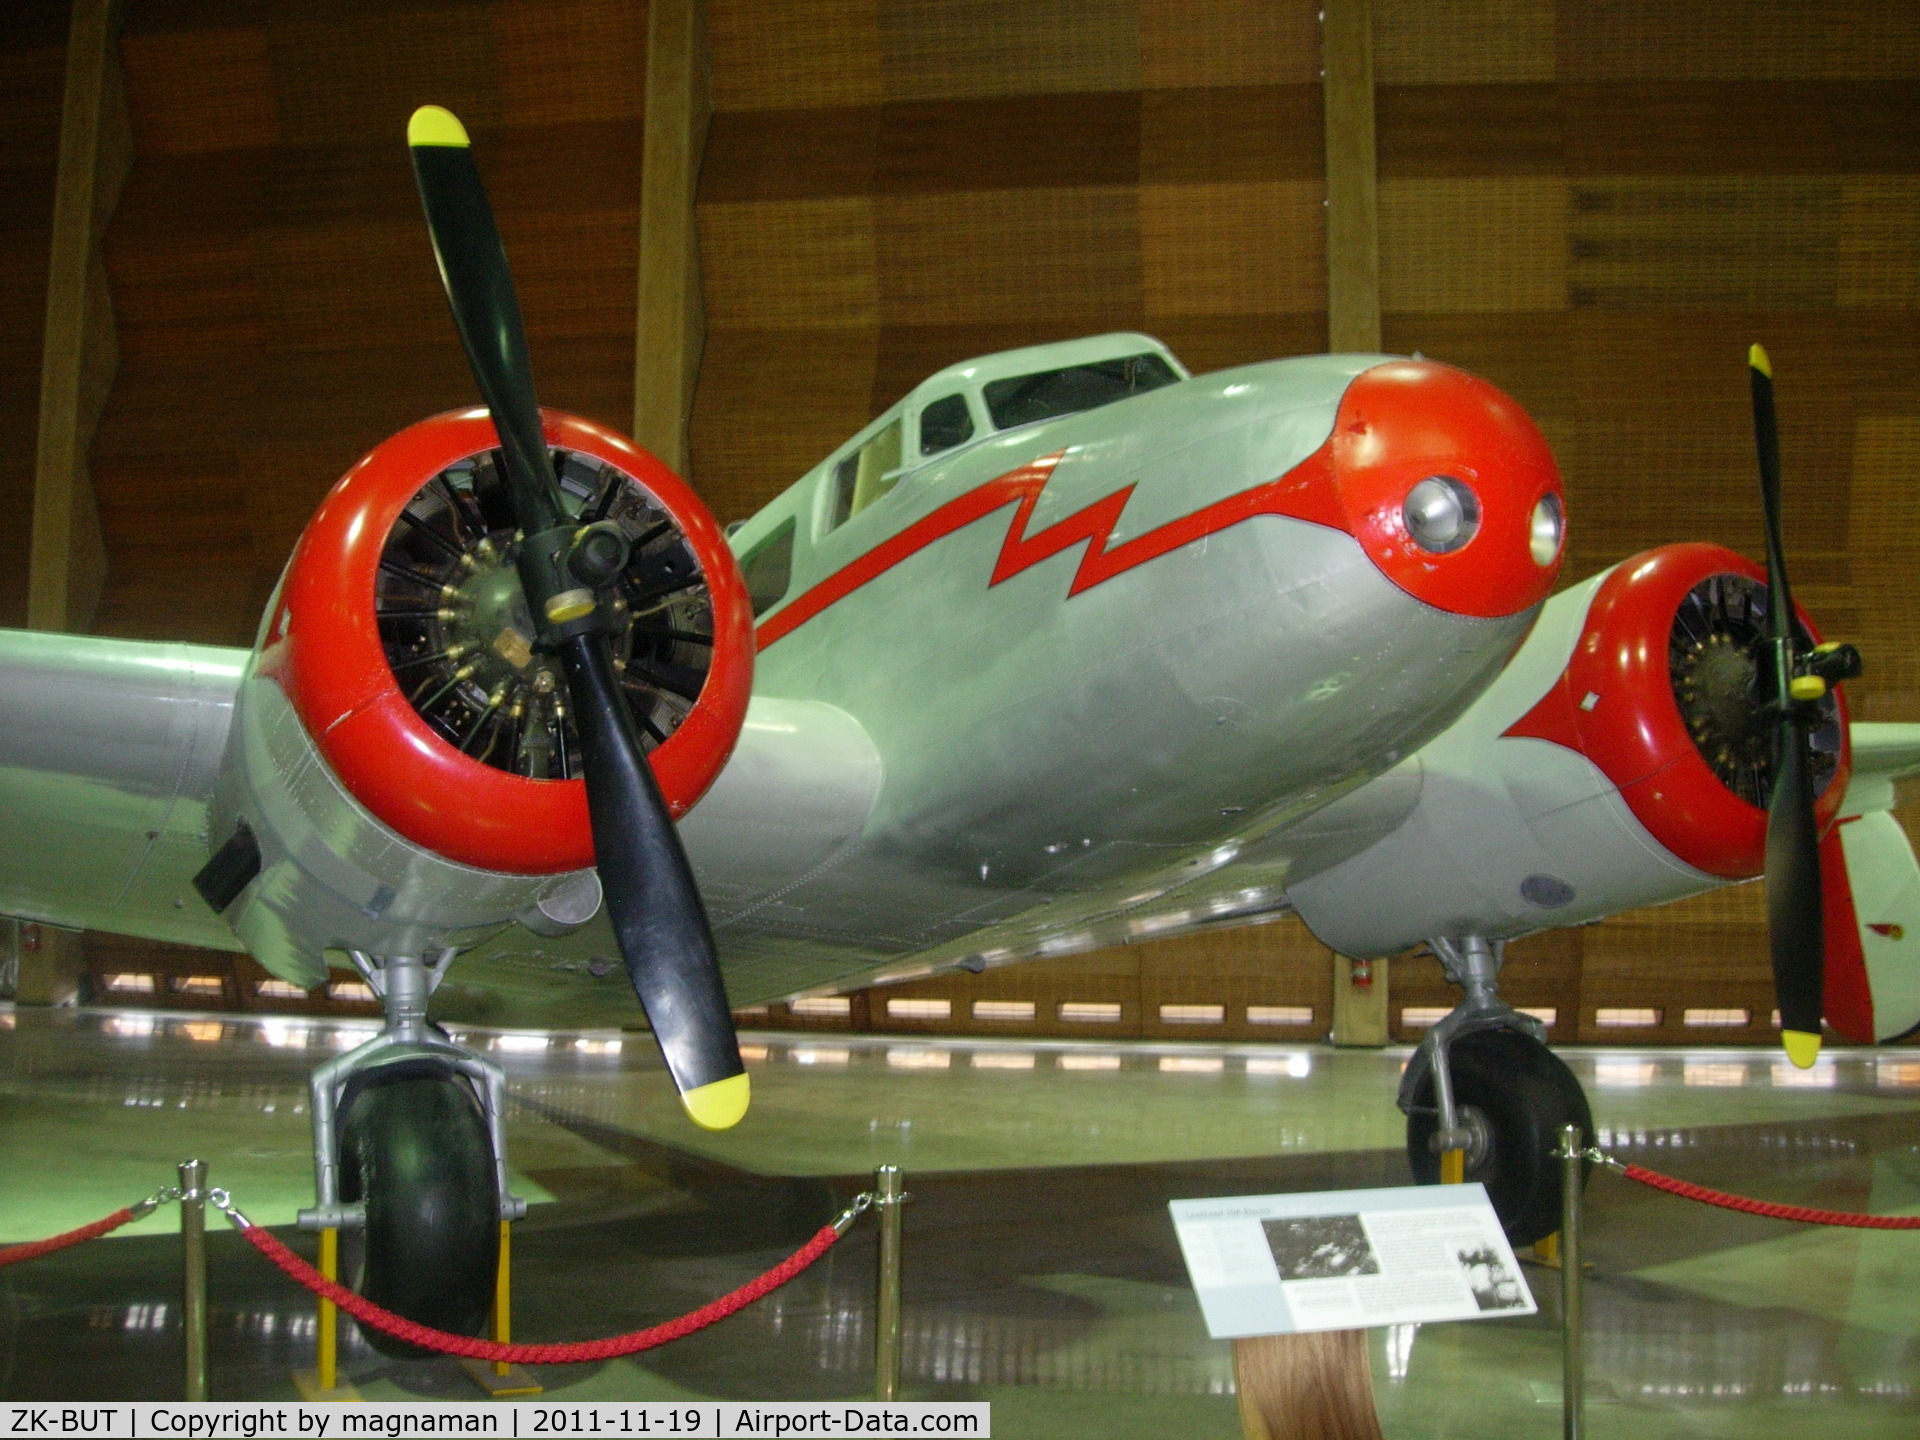 ZK-BUT, Lockheed Electra 10-A C/N 1138, In new hall at MOTAT - painted as AFD - not sure why.